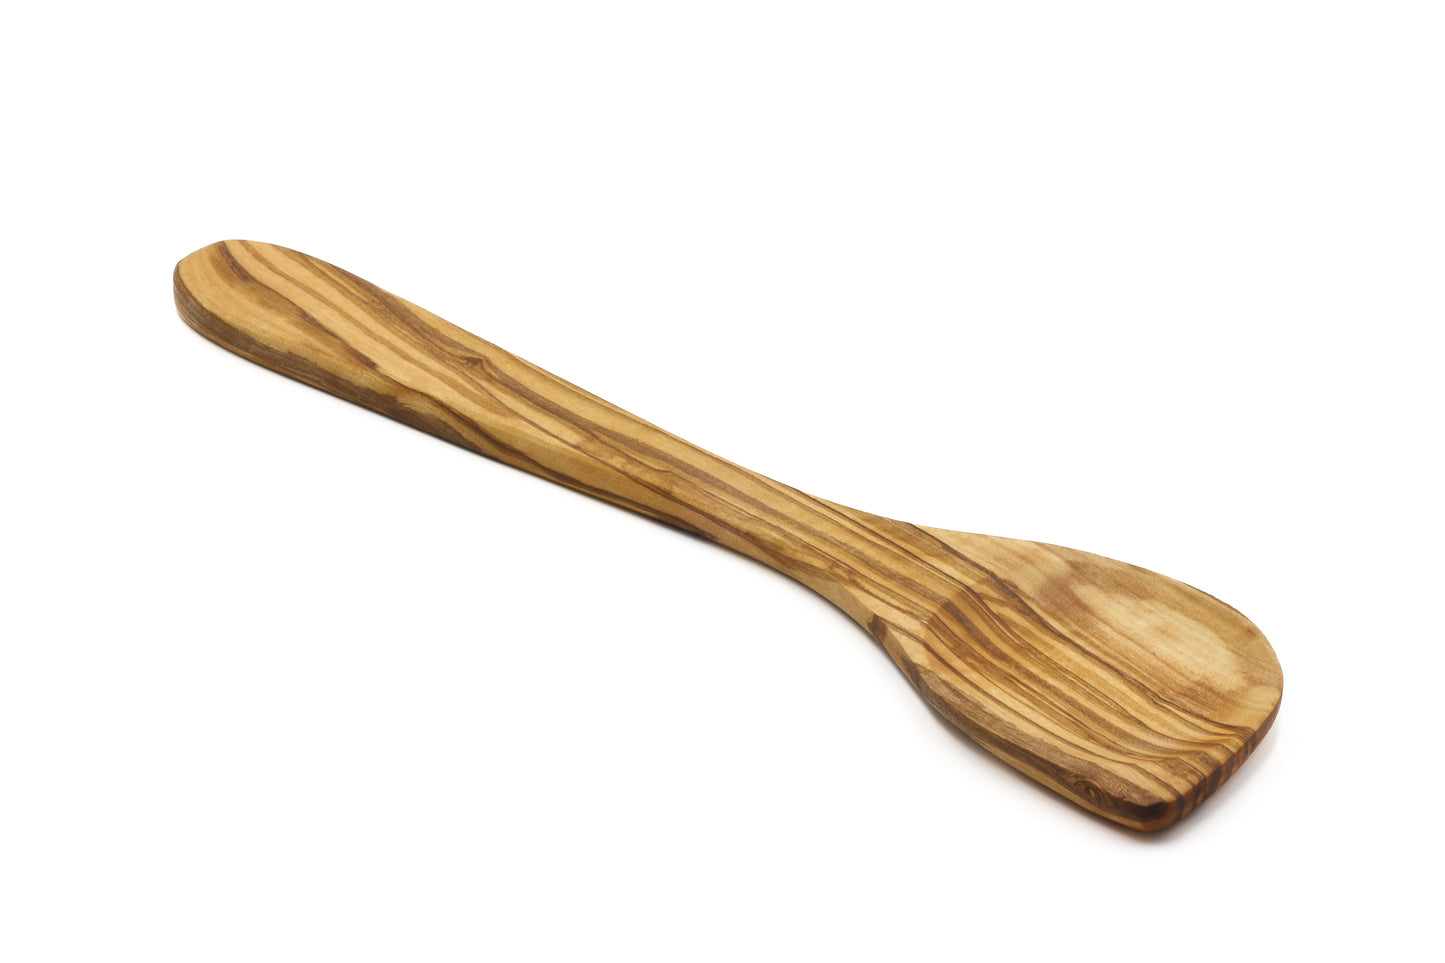 Exquisite artisan-made pointed spoon in olive wood